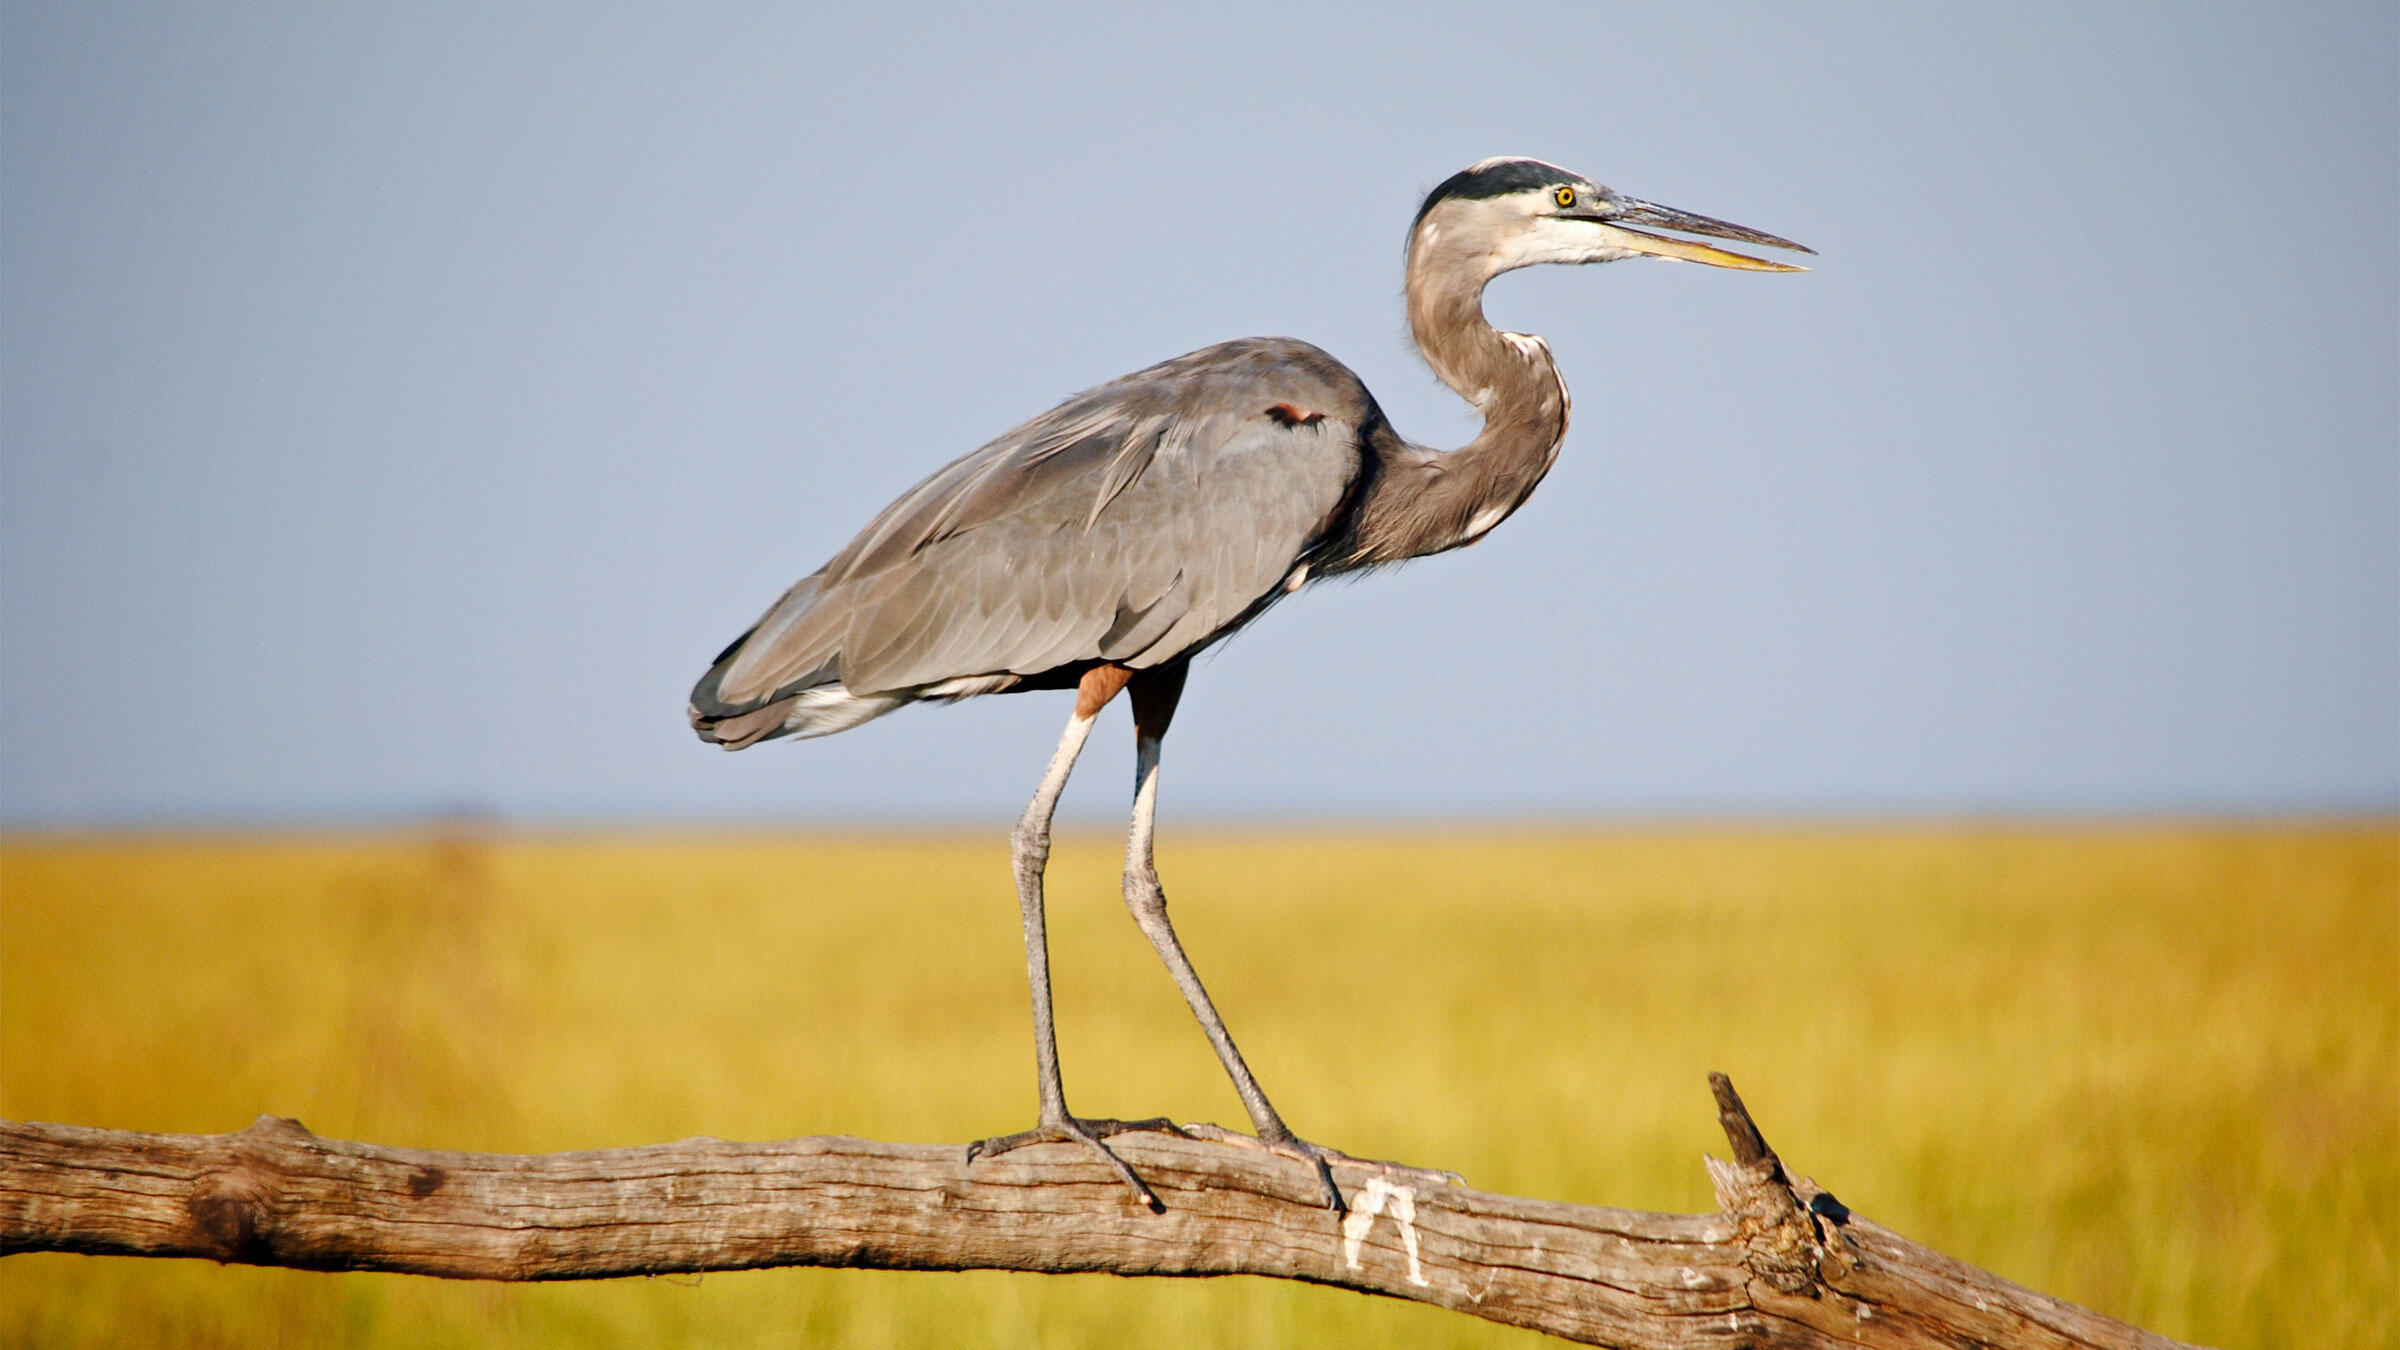 A great blue heron walking along a log backed by a yellow field and a blue sky.